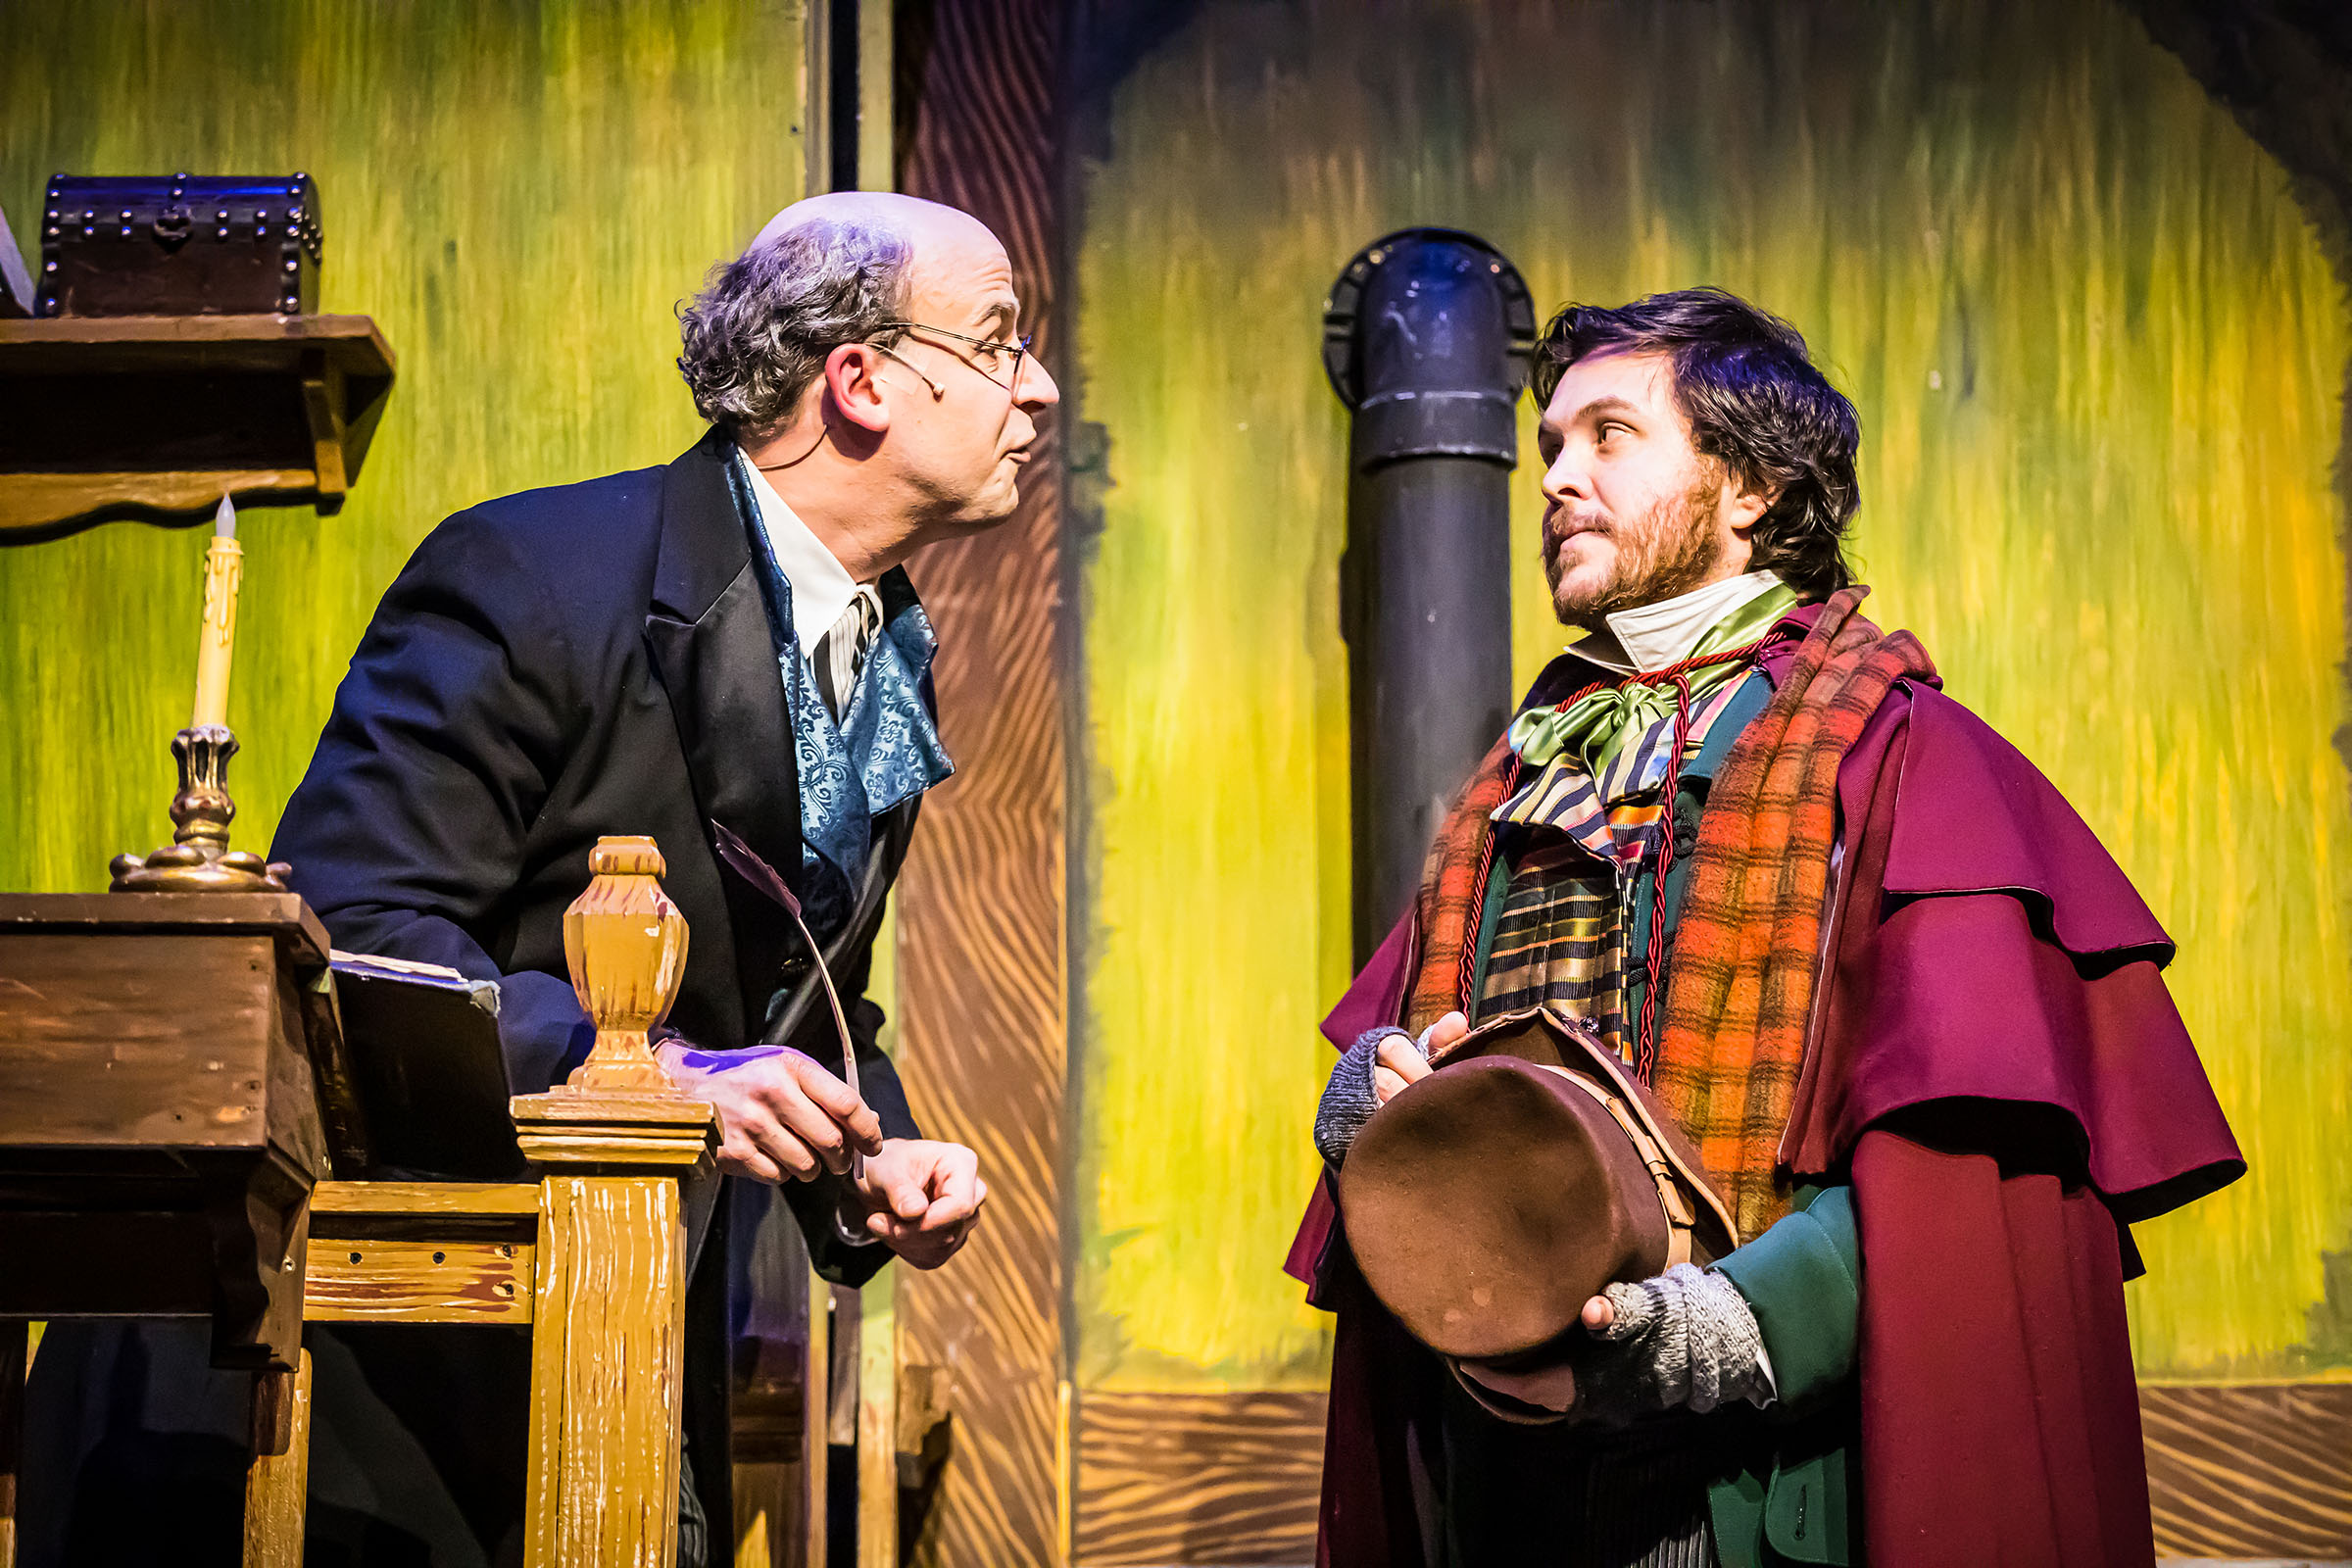 A man playing Ebenezer Scrooge leans in and talks to another character during a performance